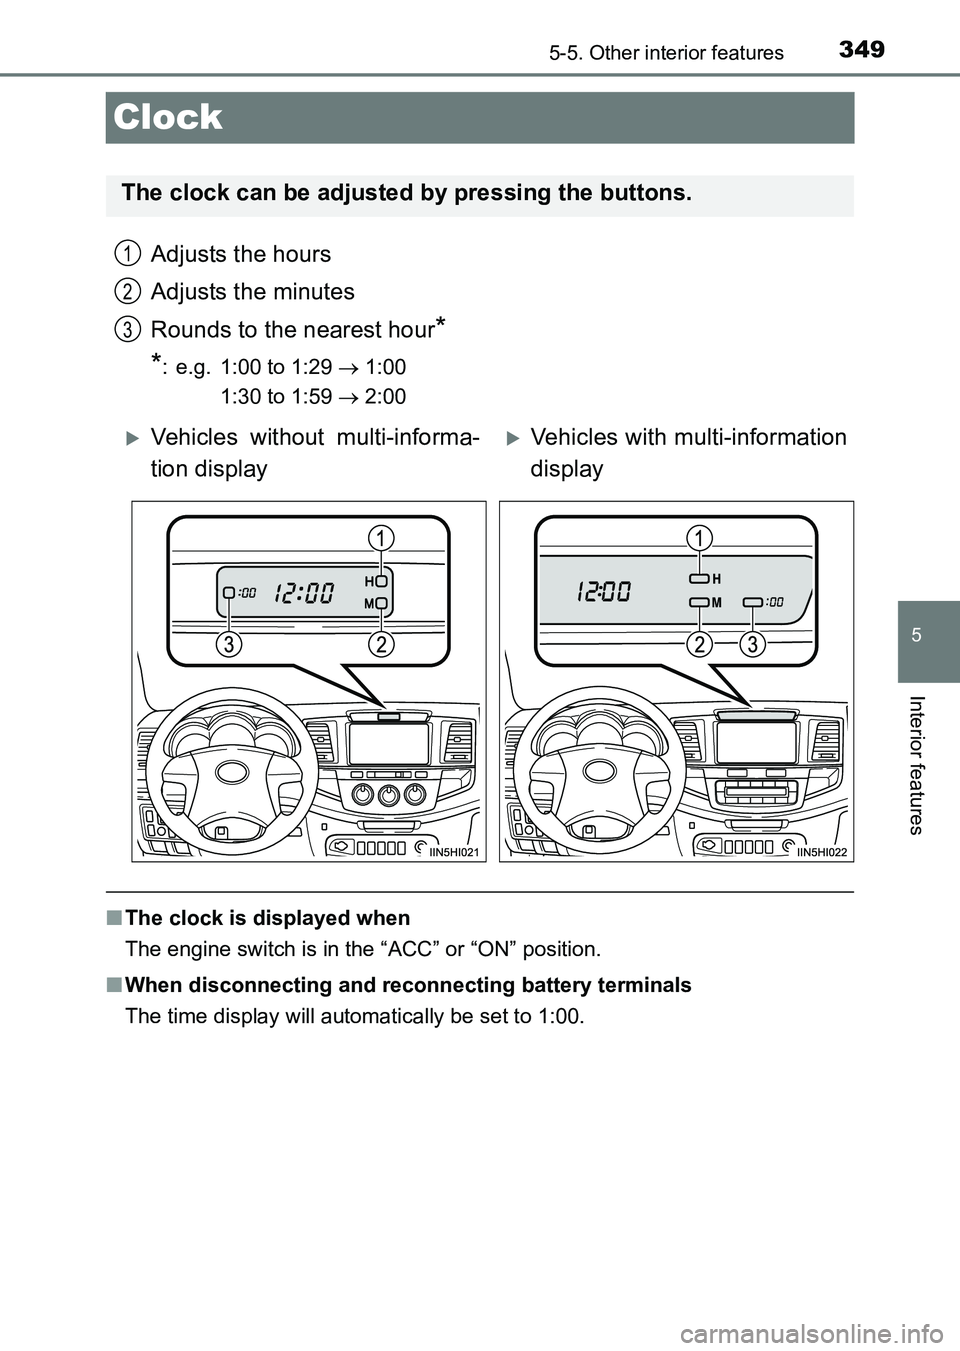 TOYOTA HILUX 2015  Owners Manual (in English) 349
5
5-5. Other interior features
Interior features
HILUX_OM_OM0K219E_(EE)
Clock
Adjusts the hours
Adjusts the minutes
Rounds to the nearest hour
*
*
: e.g. 1:00 to 1:29  → 1:00 
1:30 to 1:59  → 